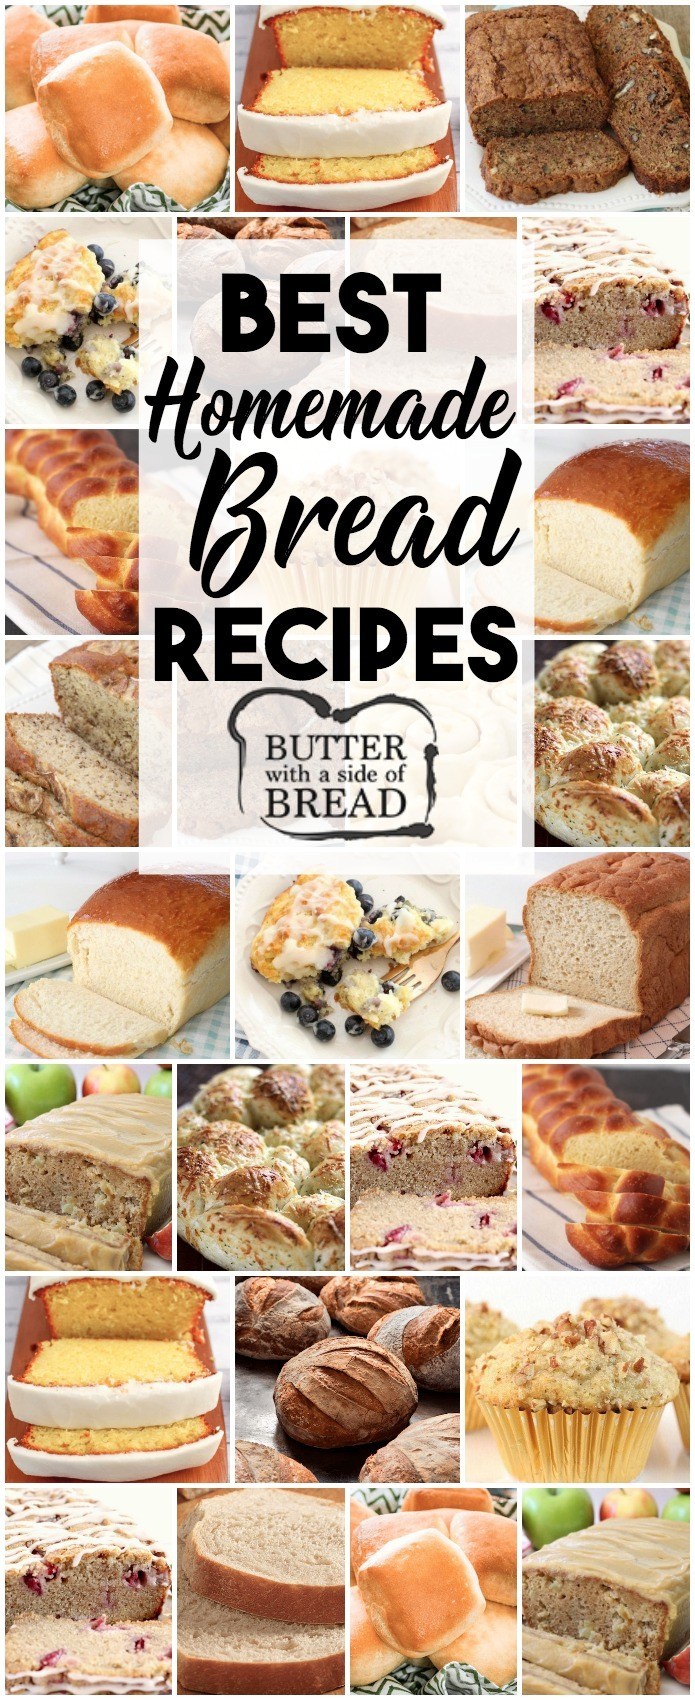 Best Bread Recipes~ from sweet to savory, quick breads to breads with yeast, we love bread! Most popular easy bread recipes we can't get enough of in our home. If you enjoy making bread, you've got to check out these incredible bread recipes from Butter With A side of Bread #bread #recipe #yeast #quickbread #rolls #muffins #breads #food